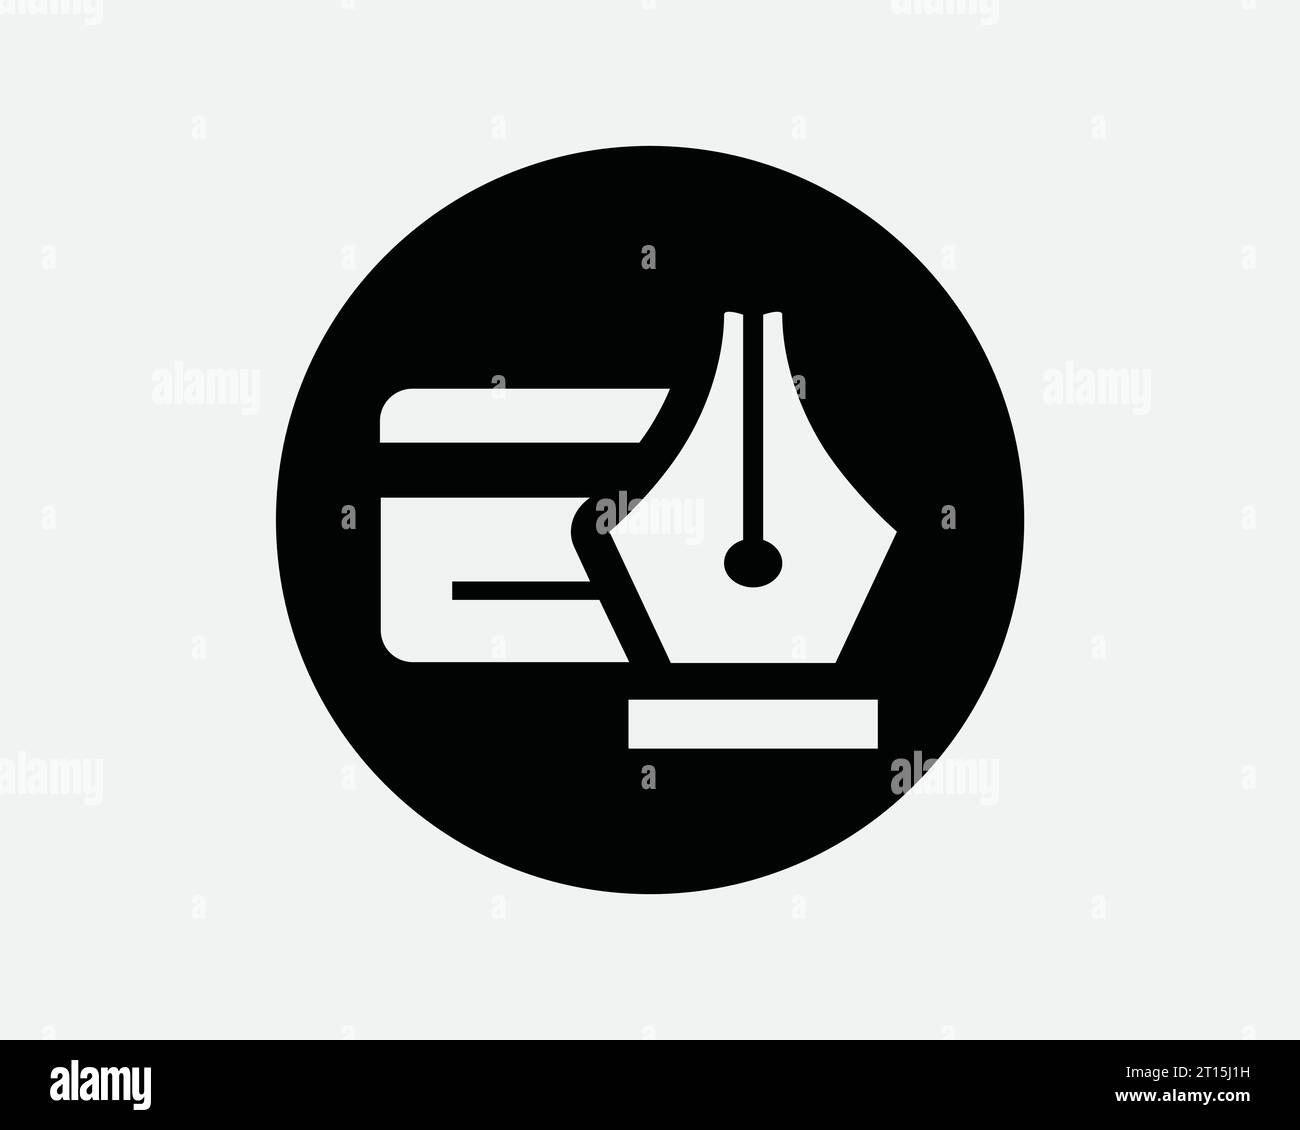 Credit Card Sign Up Round Circle Circular Icon Bank Loan Application Approve Approval Register Signature Pay Payment Black White Symbol EPS Vector Stock Vector